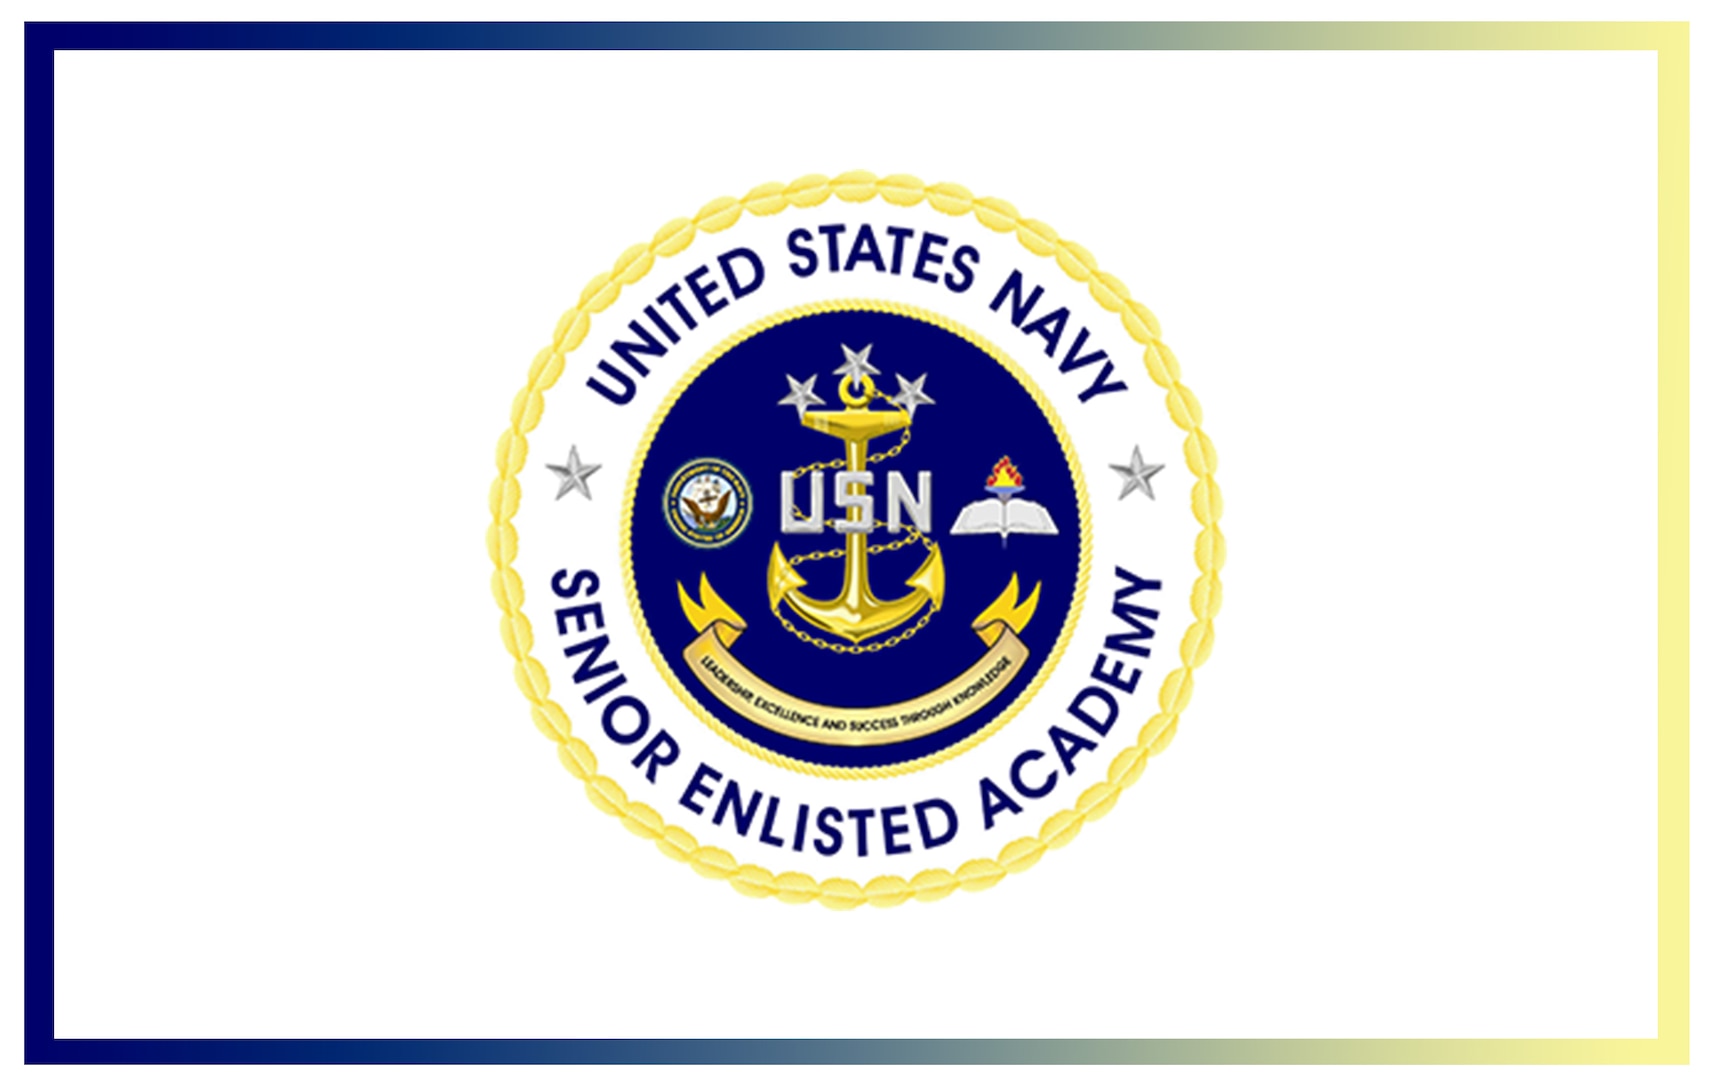 White background with a gold emblem across the center. Inside of the gold emblem are the words "United States Navy Senior Enlisted Academy."